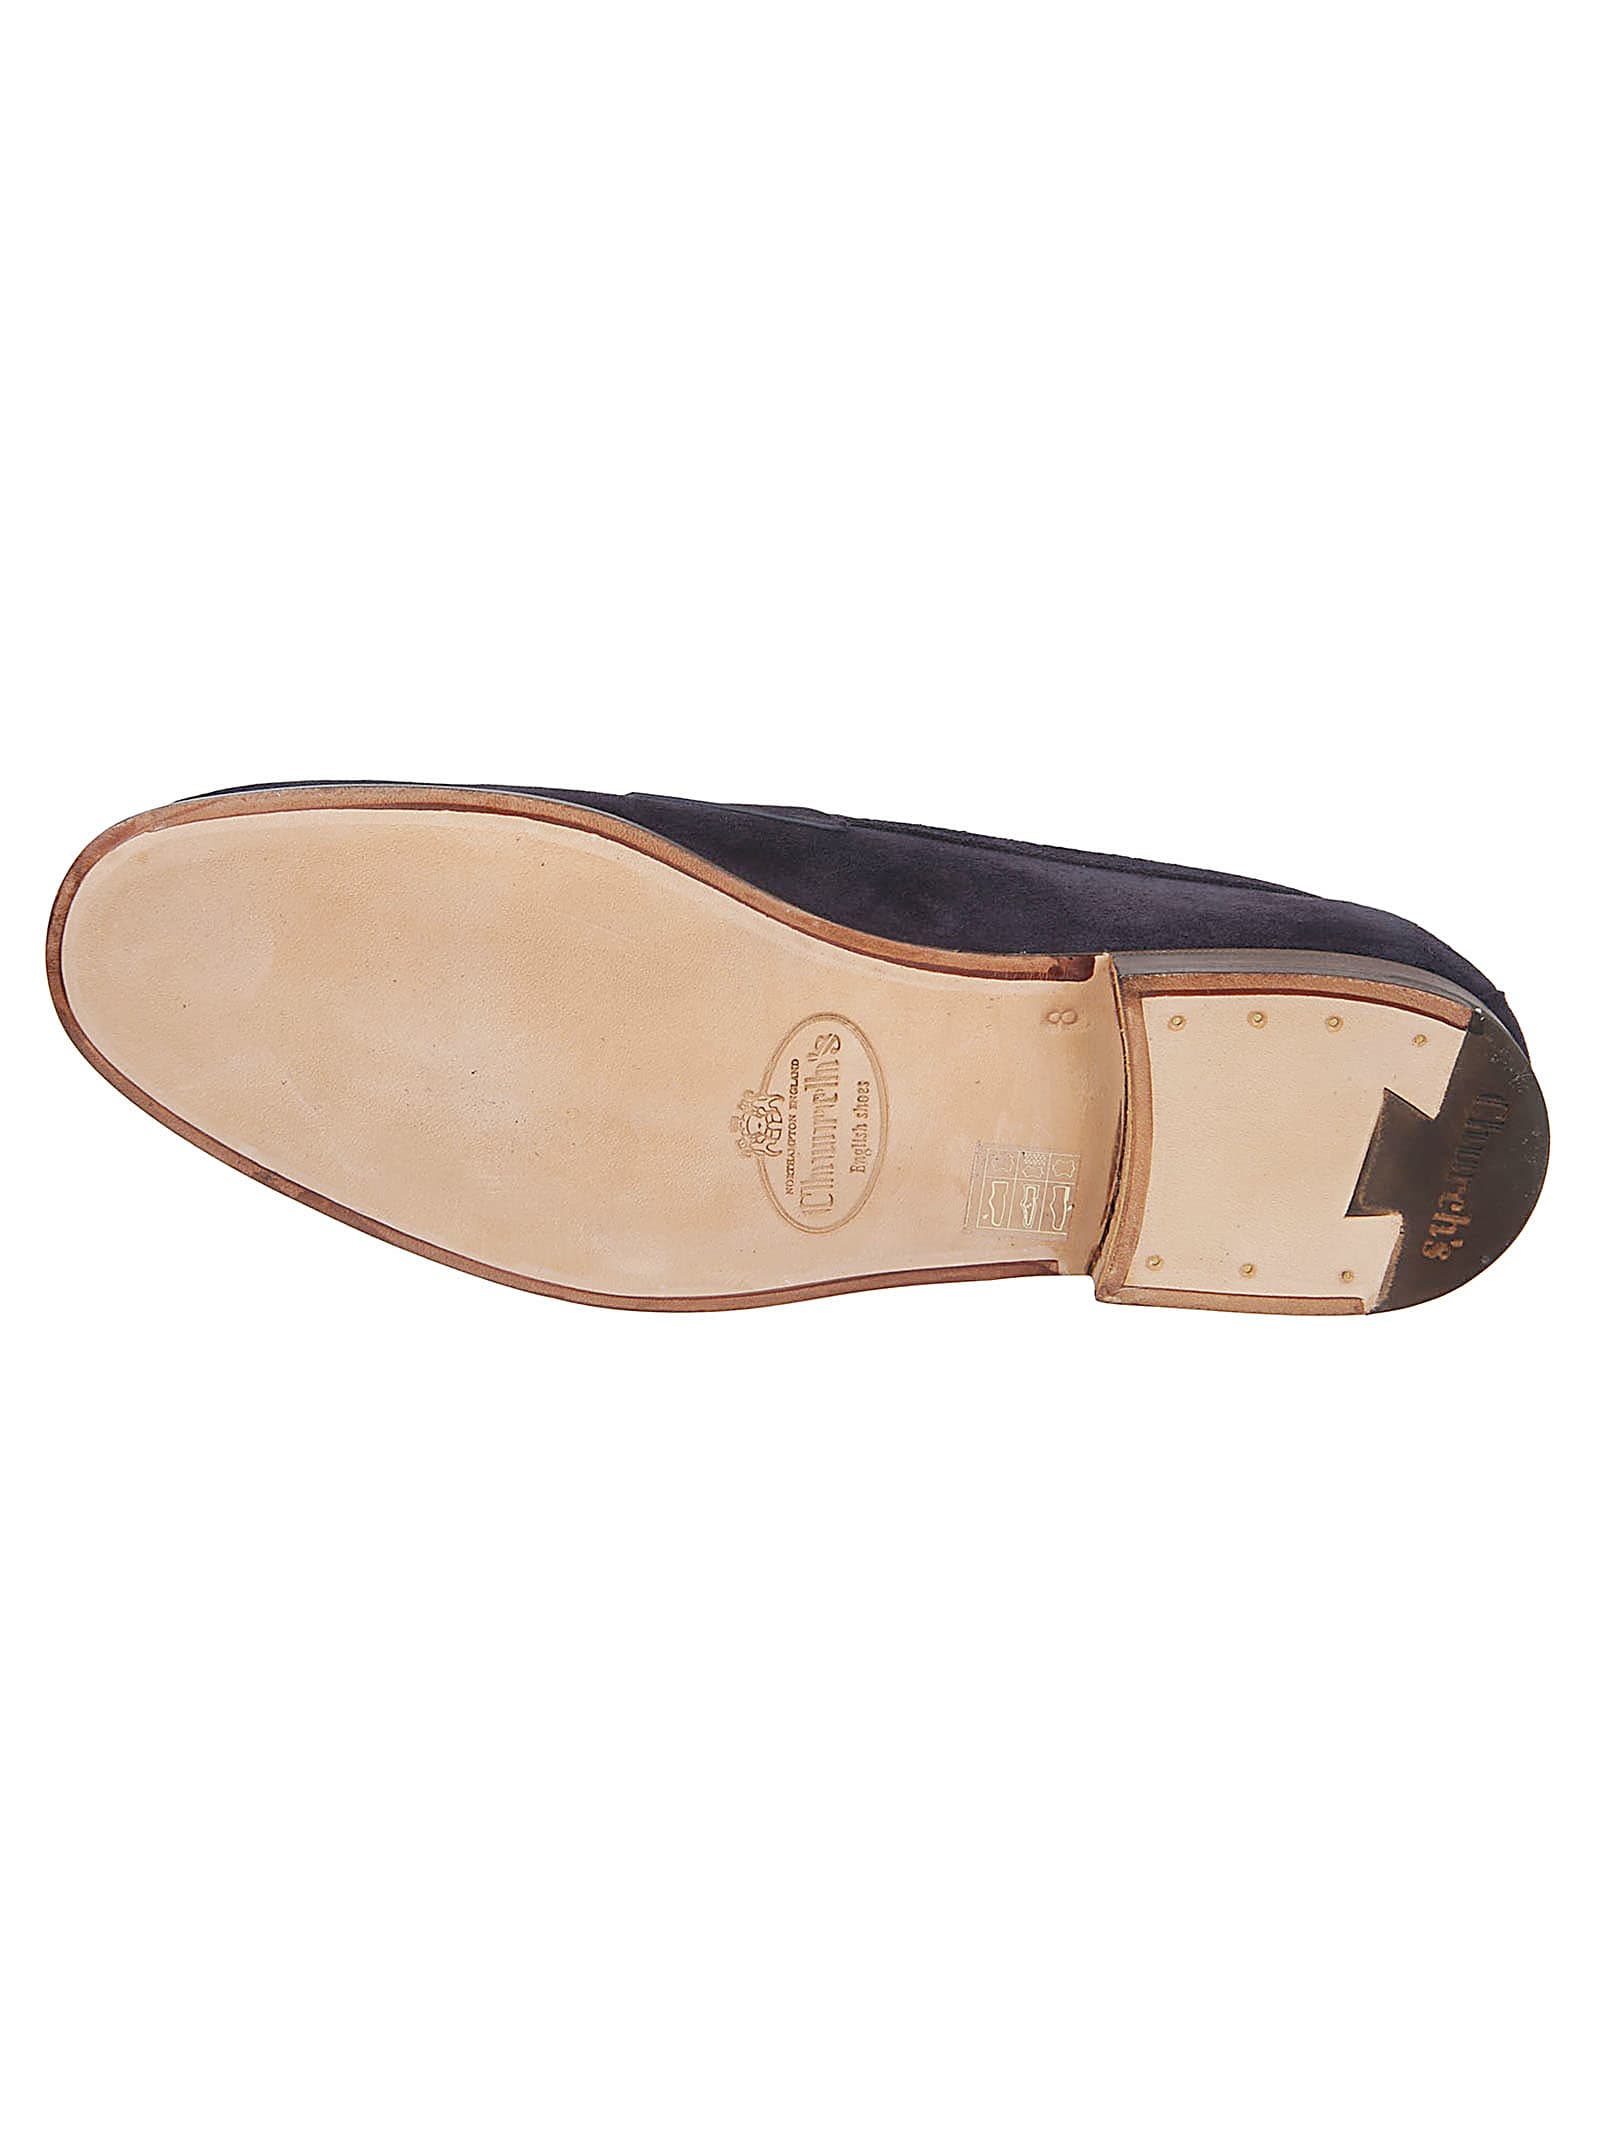 Shop Church's Maltby Loafers In Abm Navy